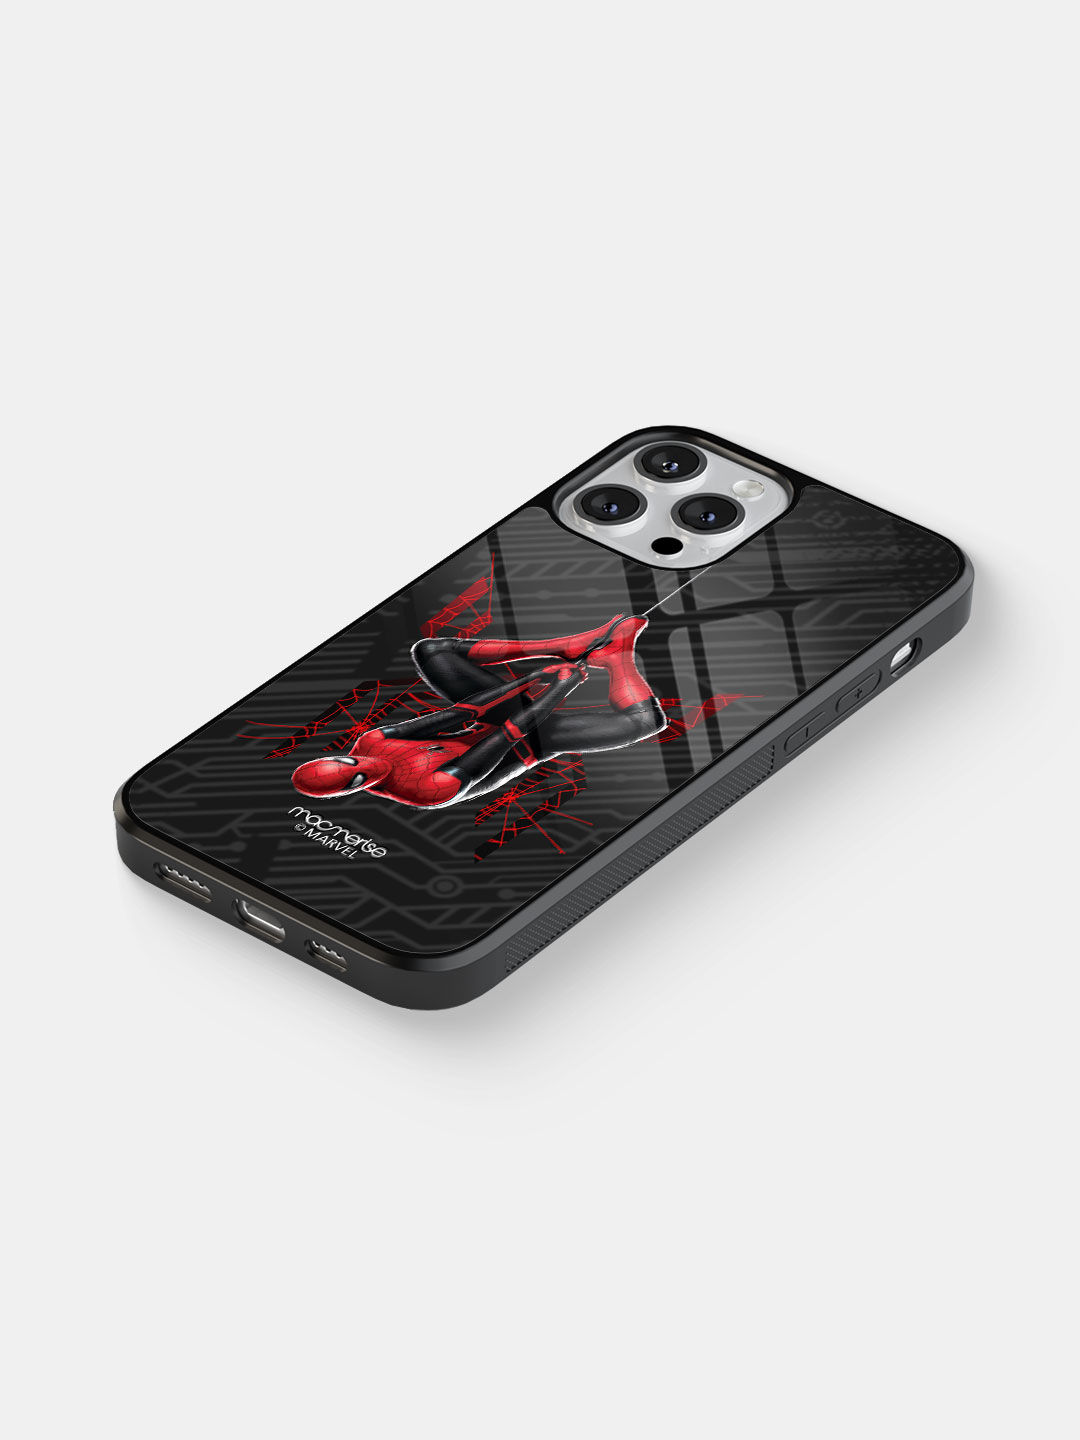 Spiderman Tingle - Glass Case For iPhone 13 Pro Max